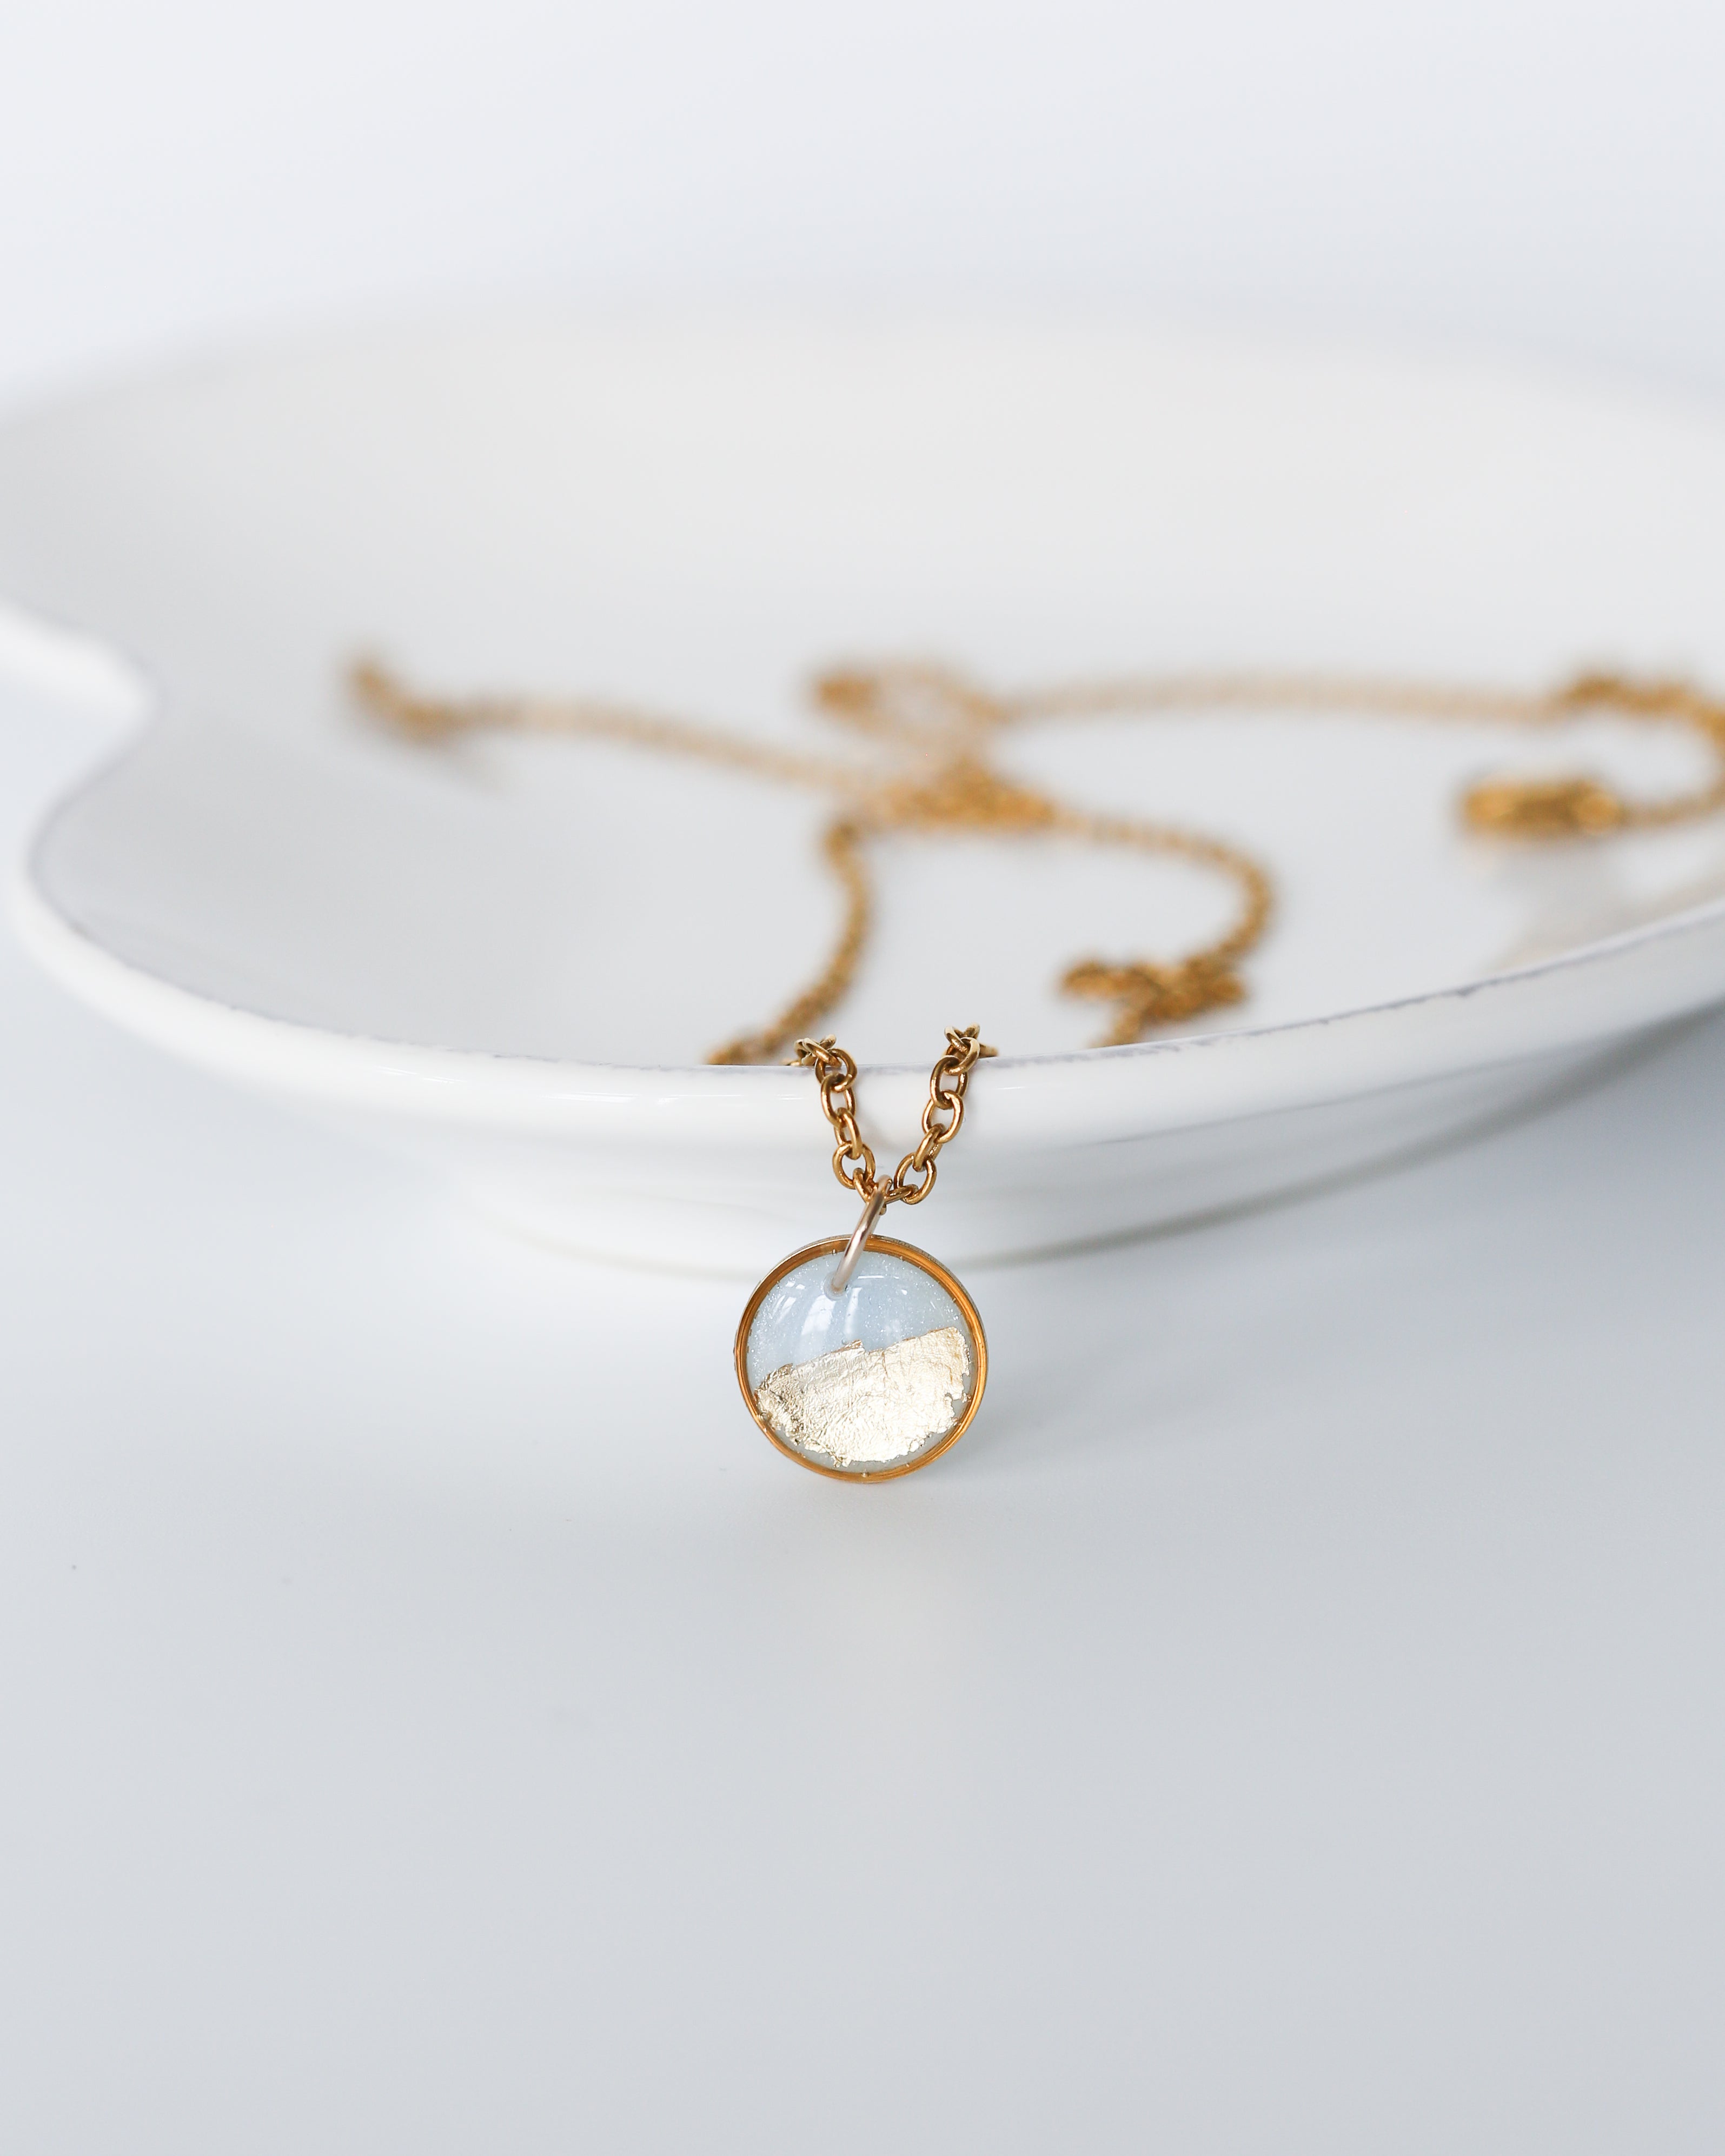 Delicate gold pendant and earrings Minimalist jewelry set